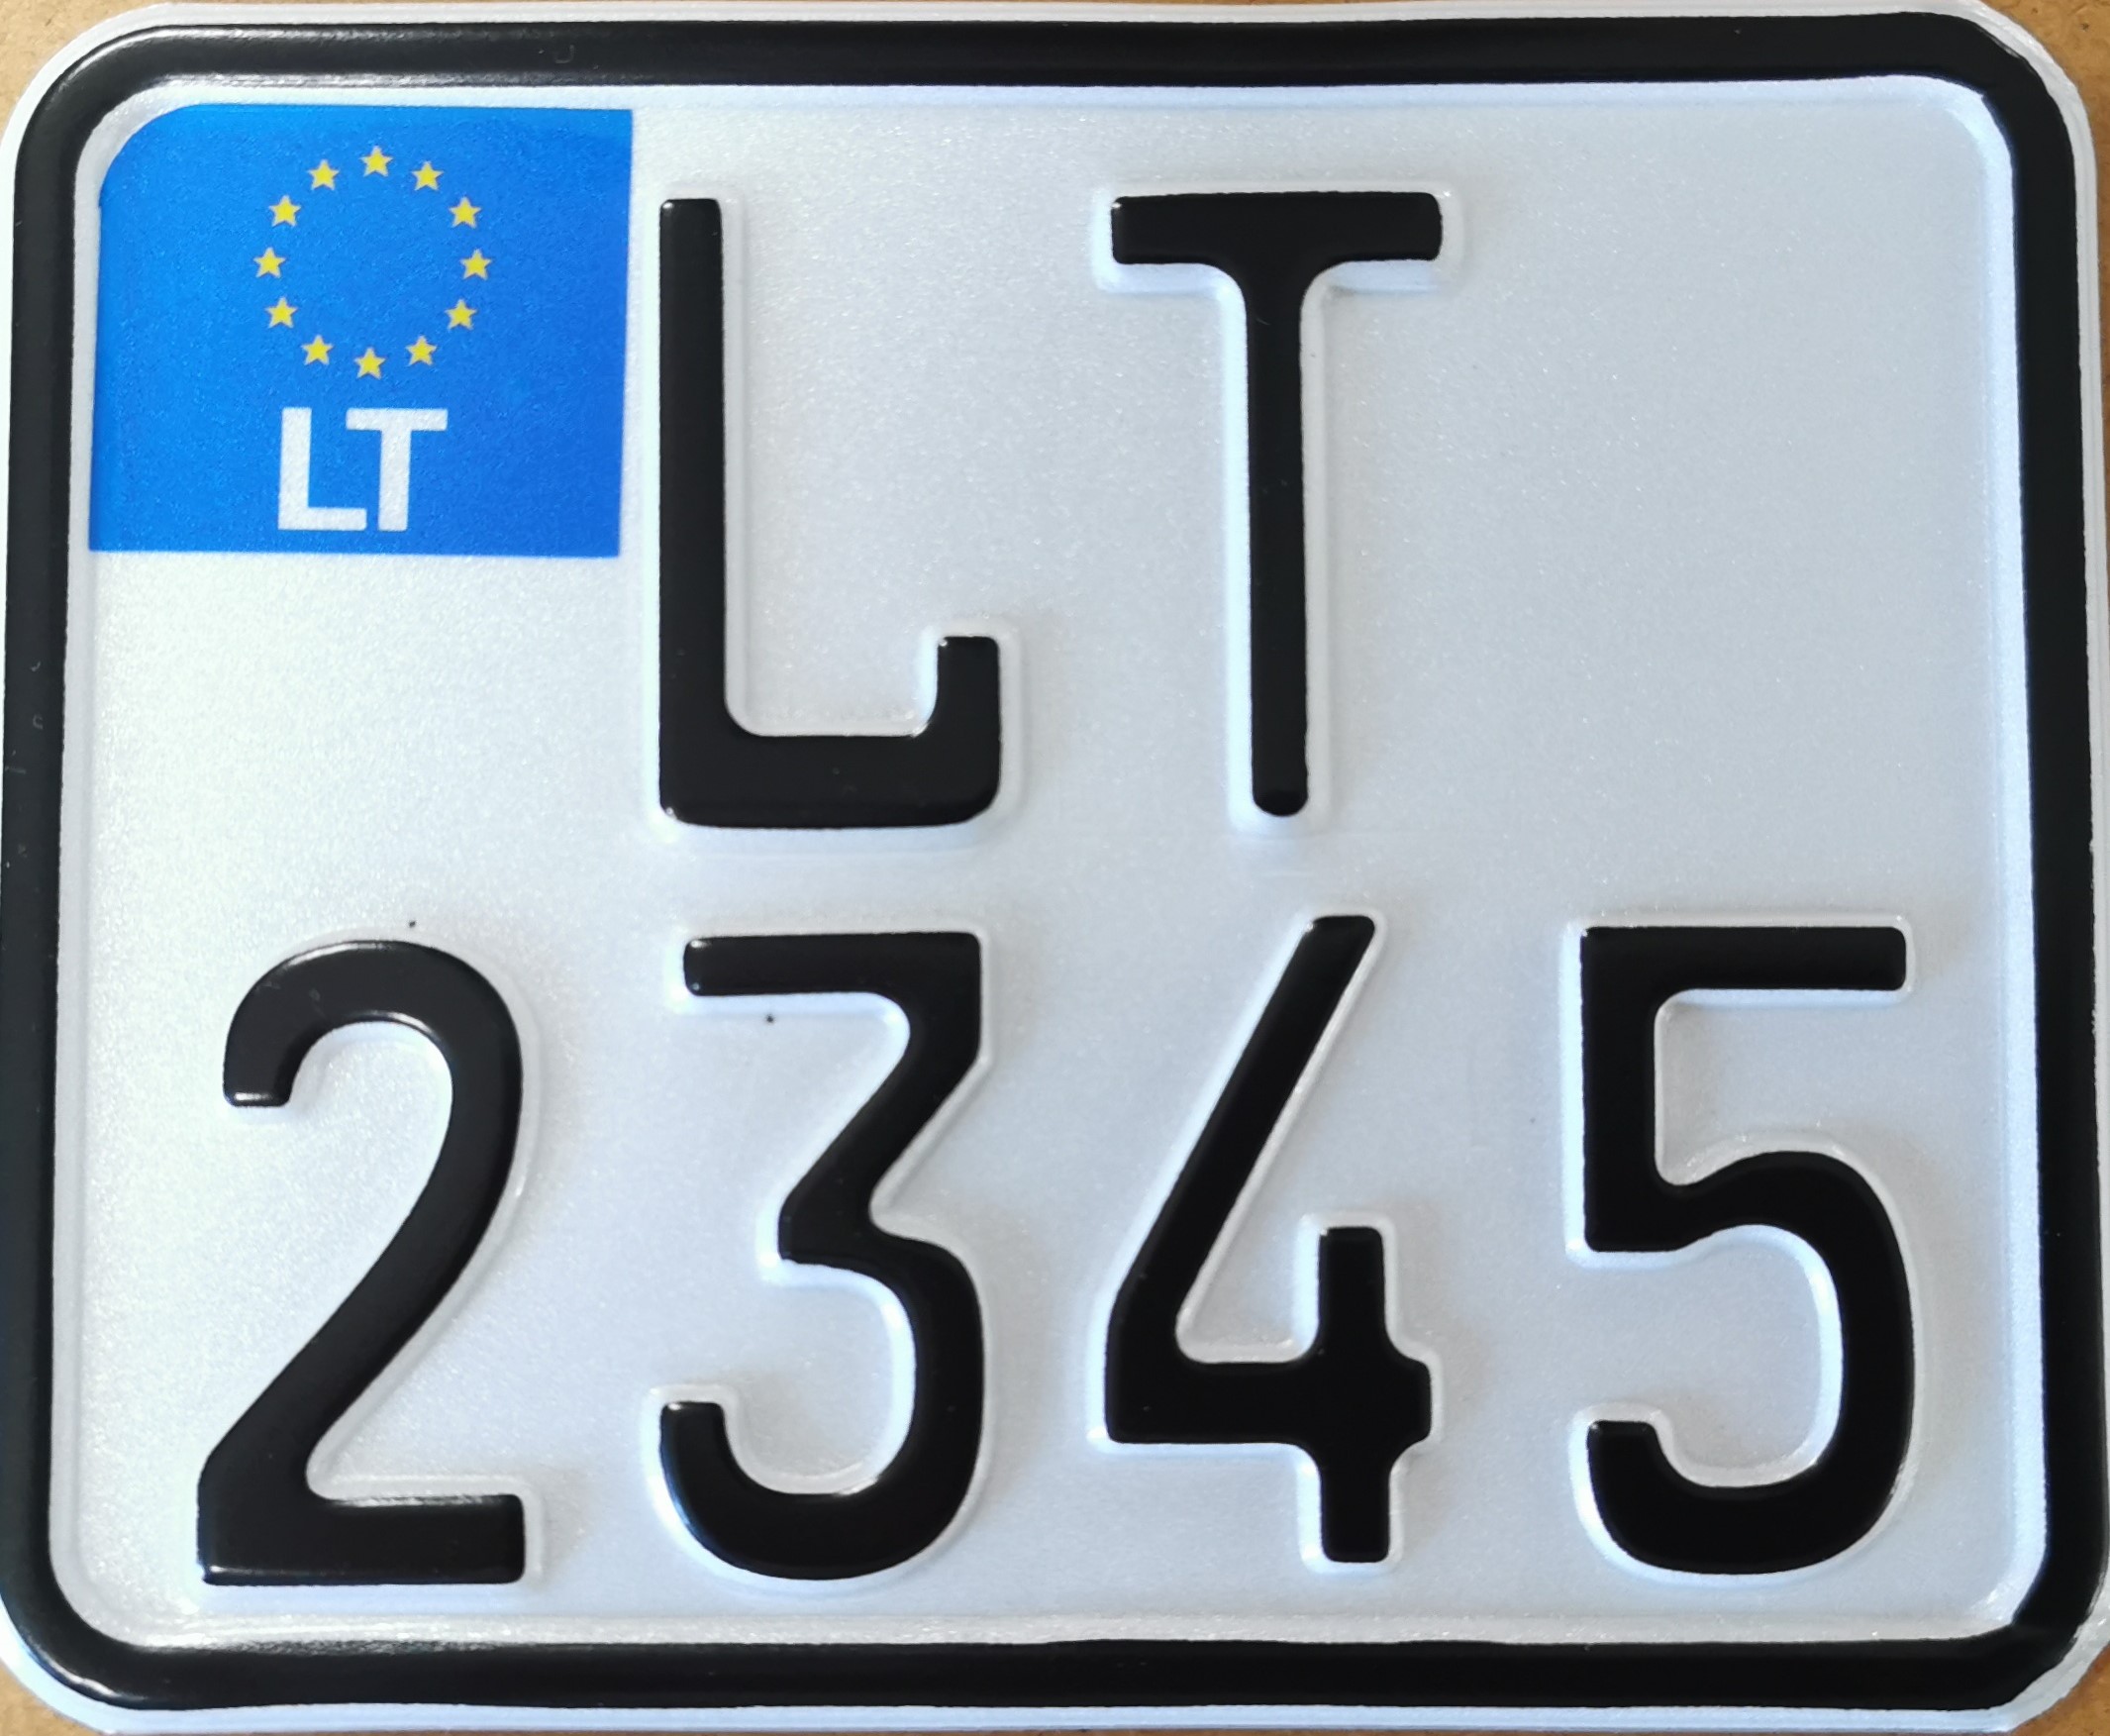 03. Lithuanian MC plate with EU-sign - Crossfighter 140 mm